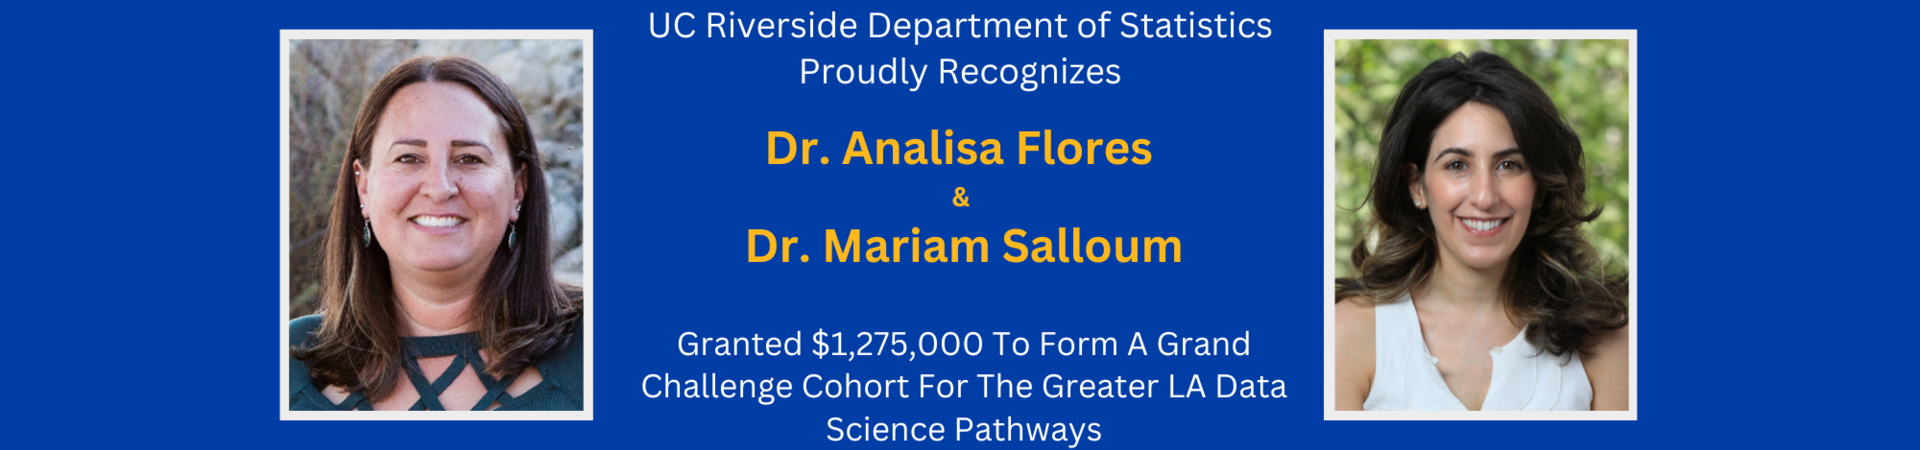 analisa flores and mariam salloum granted over a million to from a grand challenge cohort for the greater la data science pathways